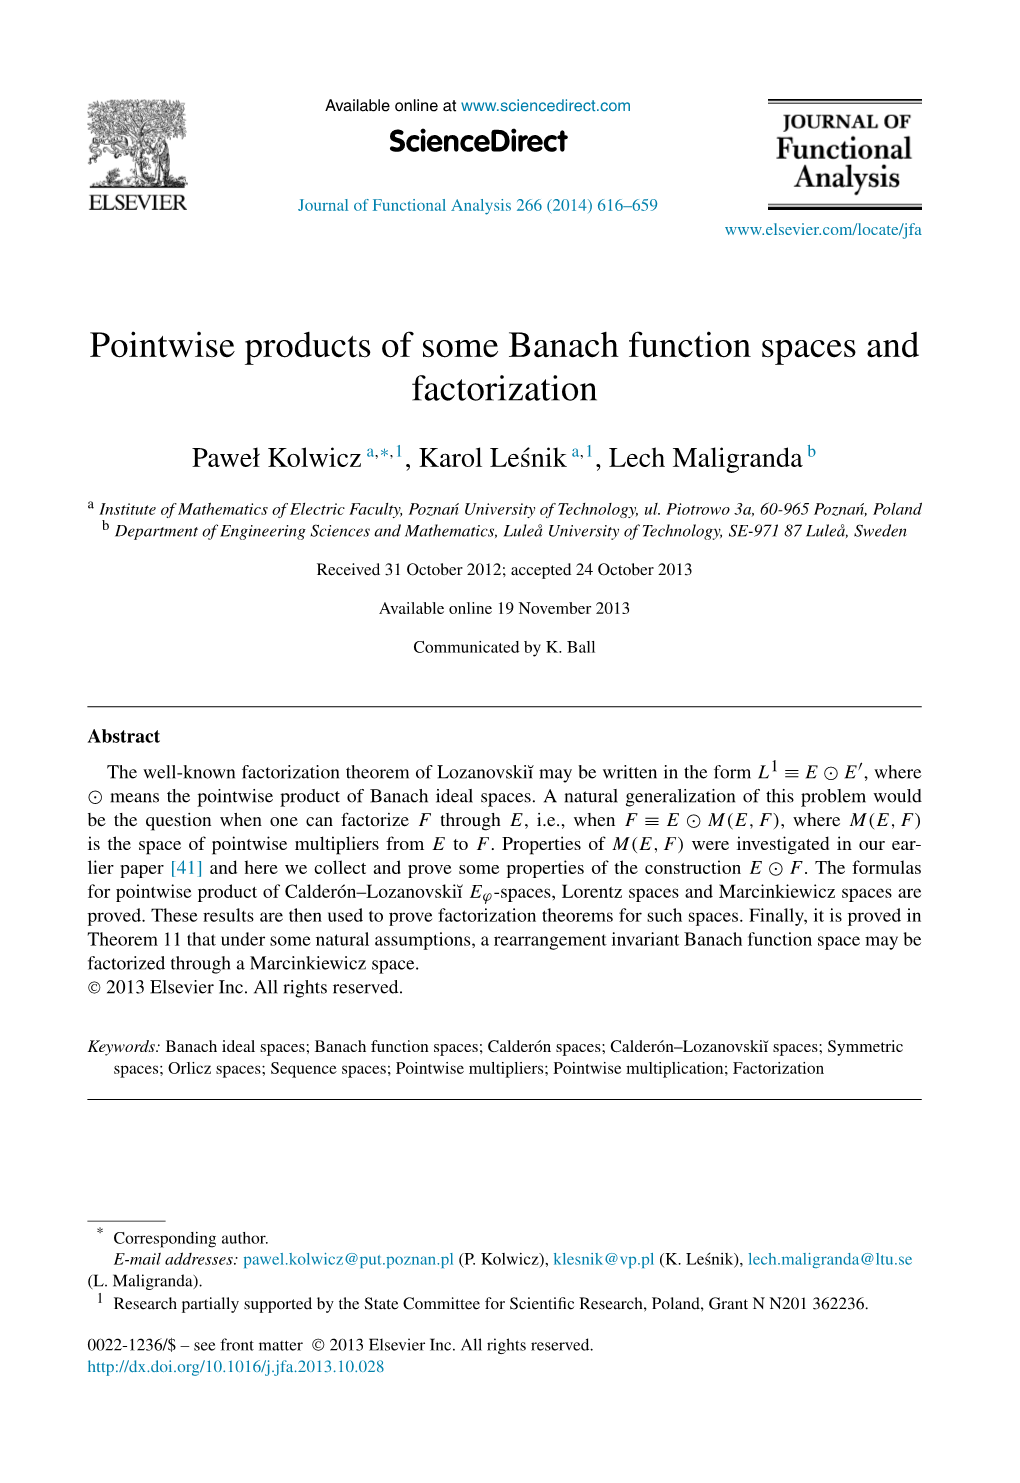 Pointwise Products of Some Banach Function Spaces and Factorization